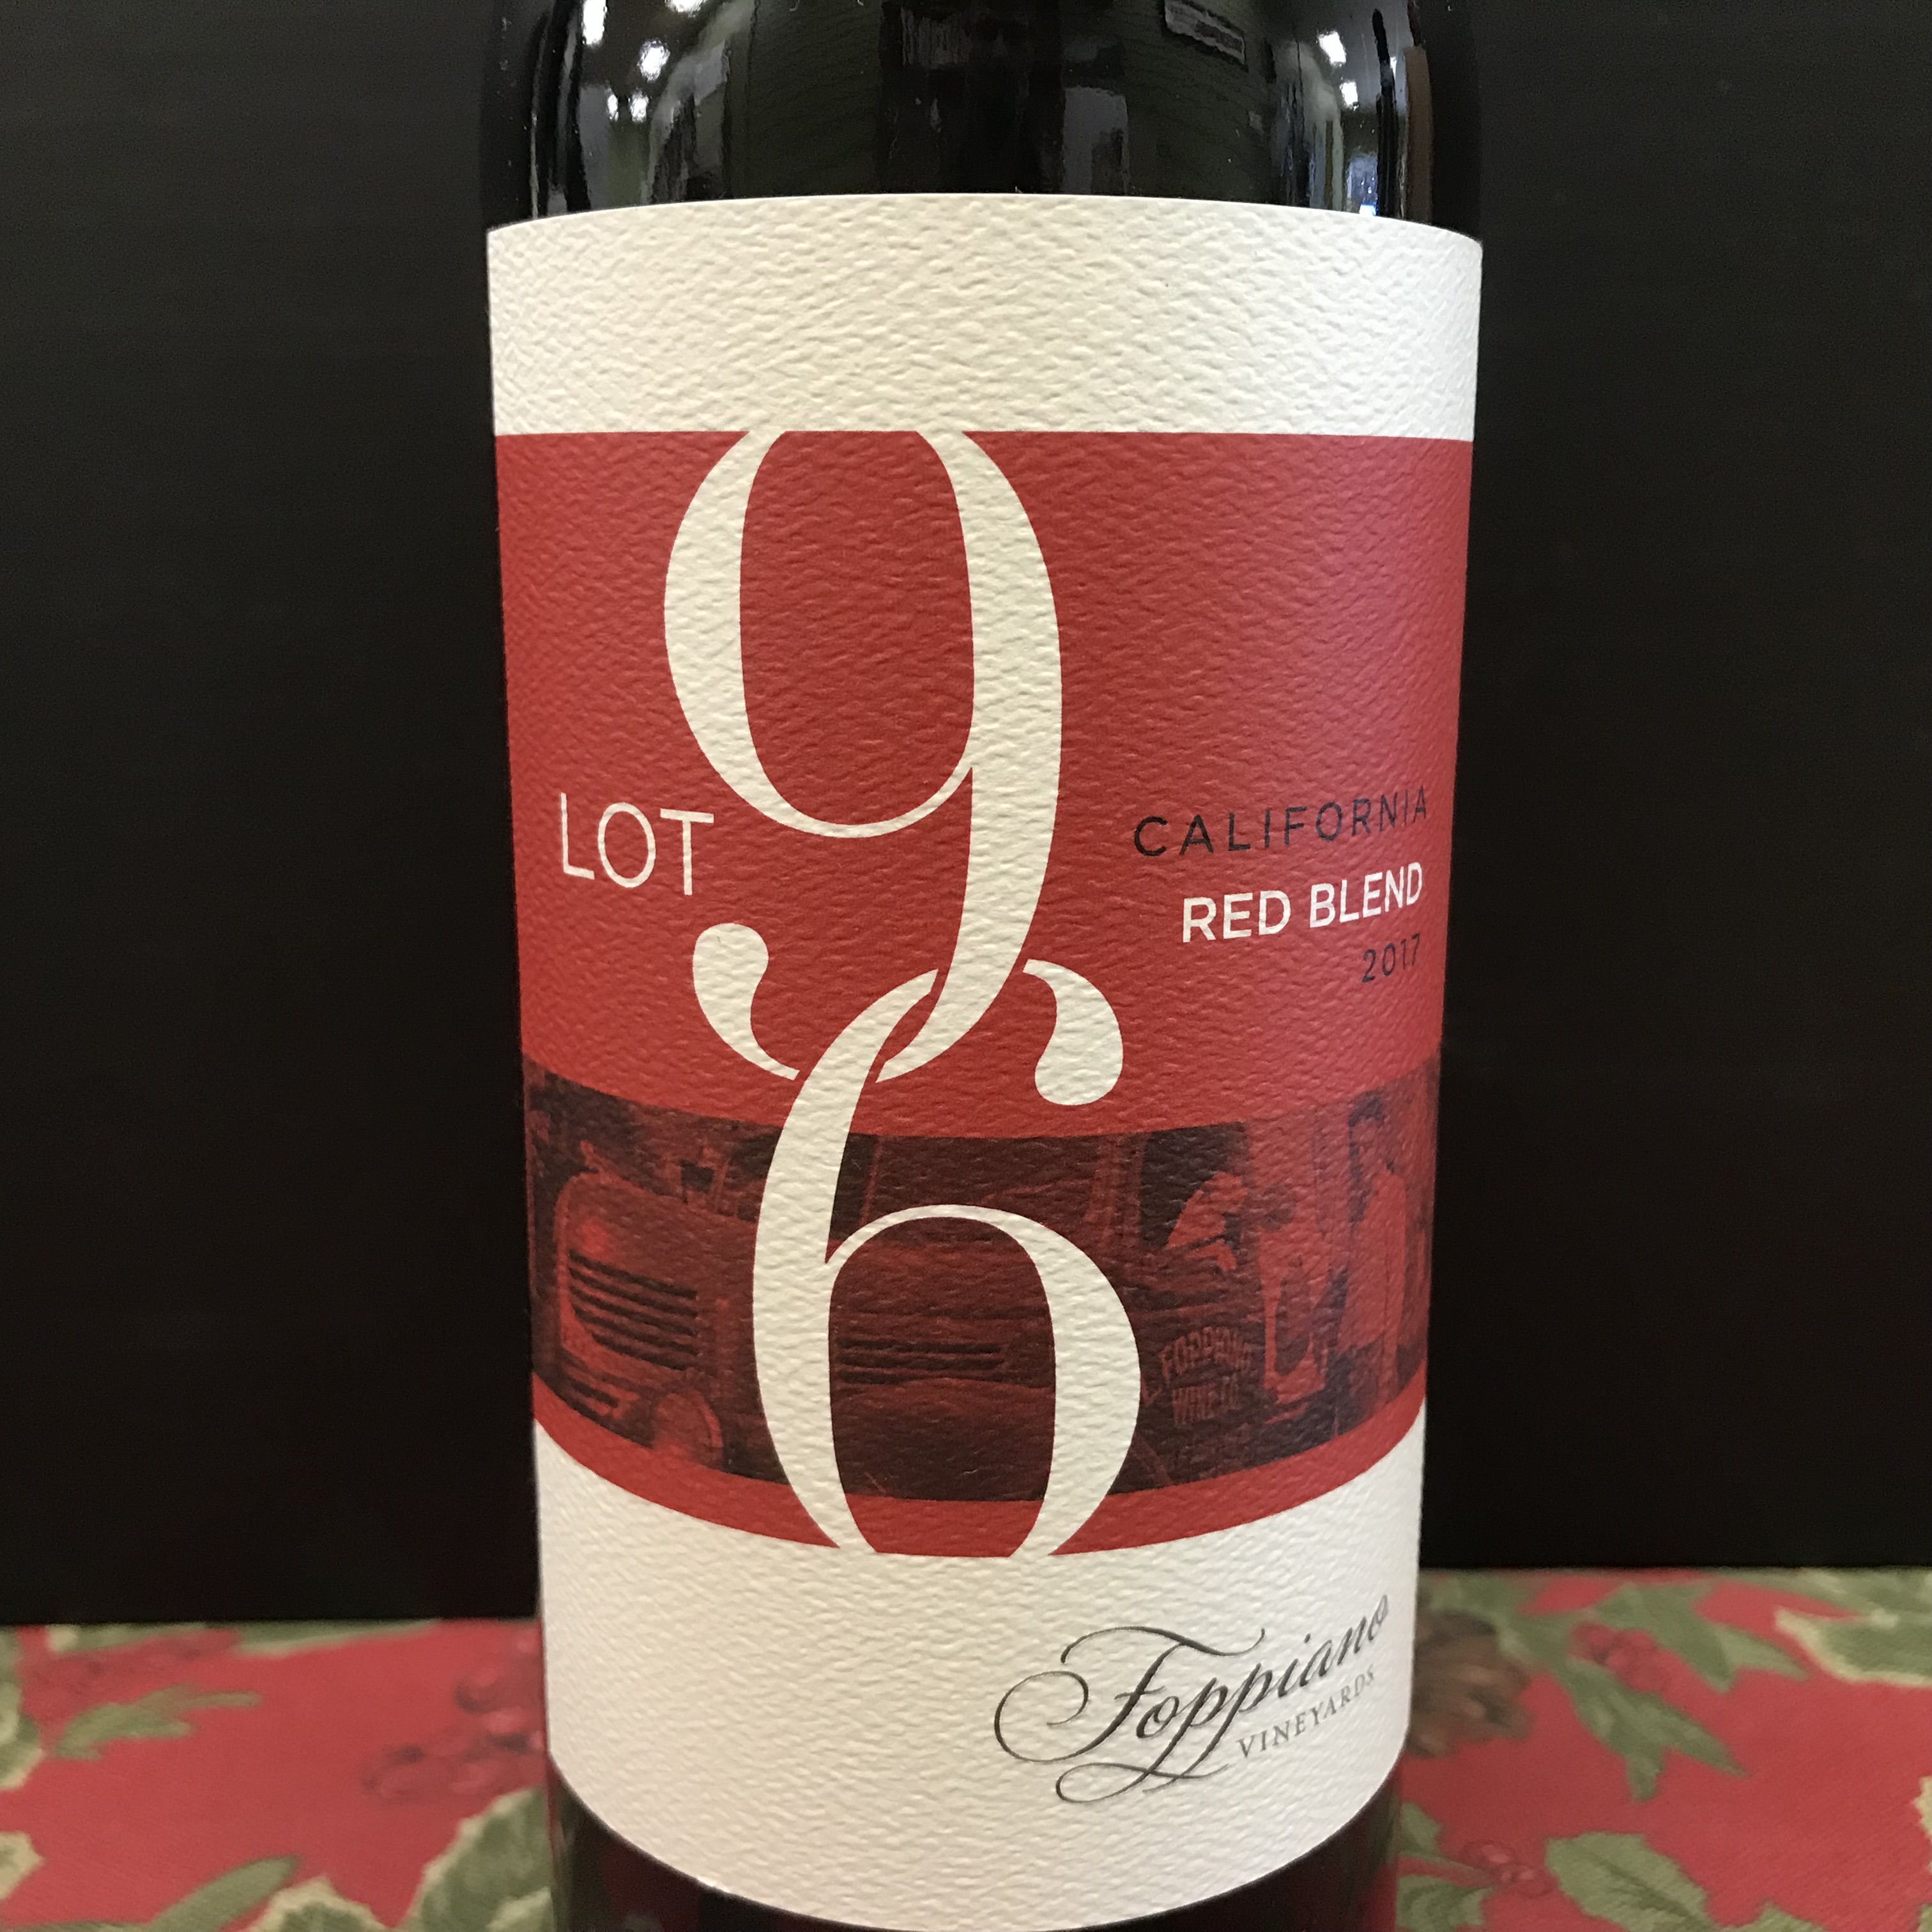 Foppiano Lot 96 Red Blend California 2017